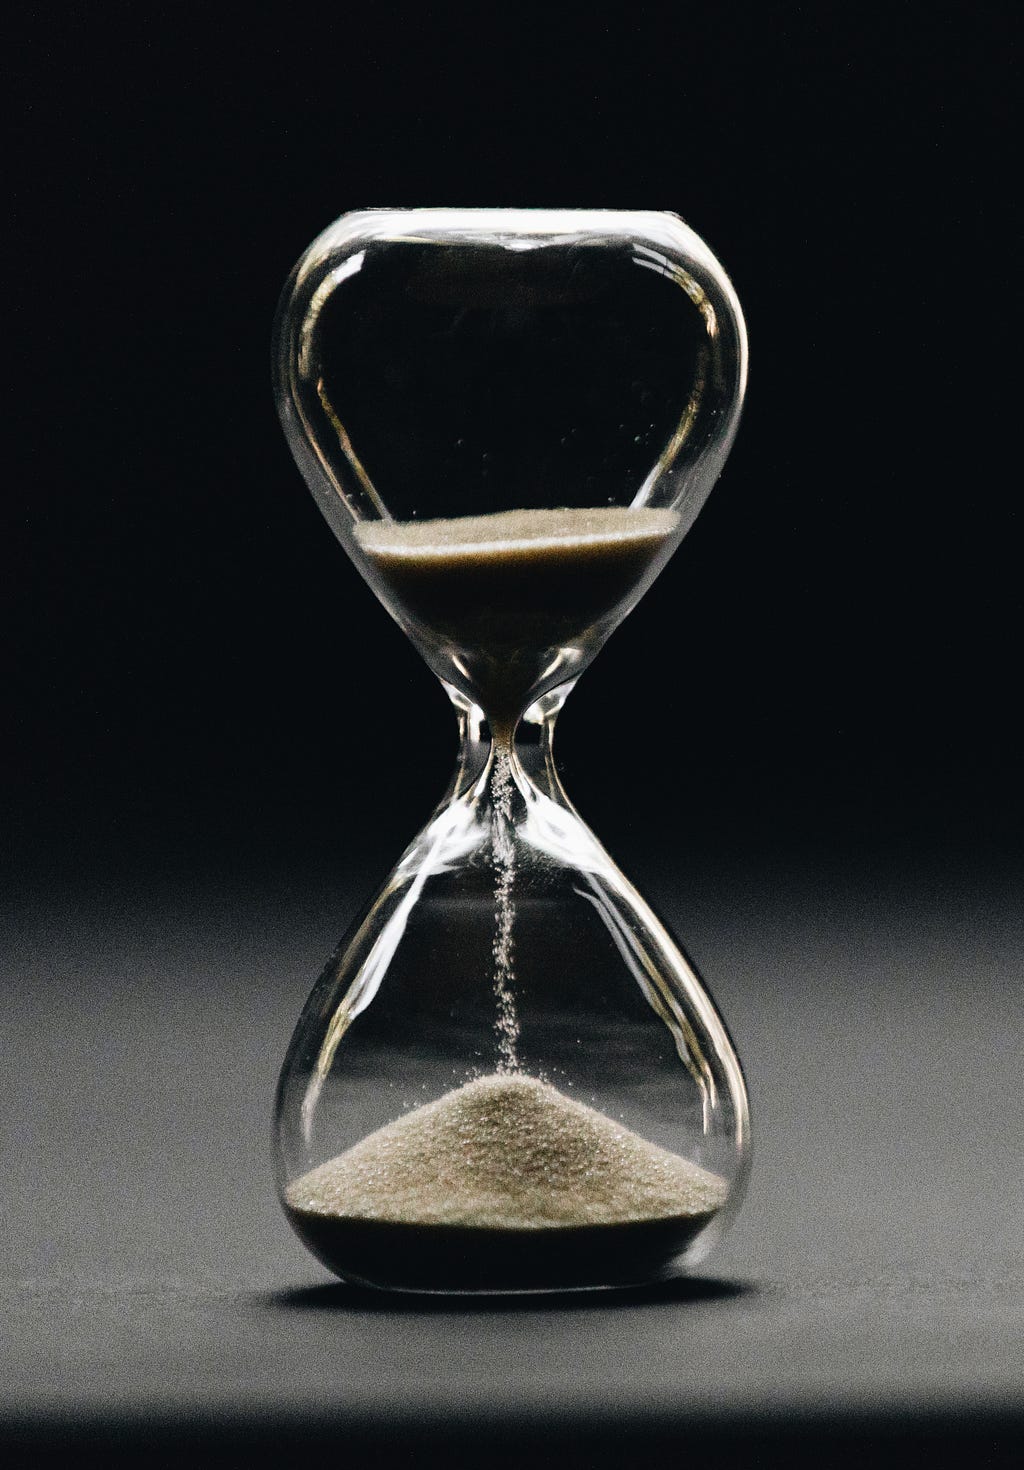 An hour-glass in motion for time management